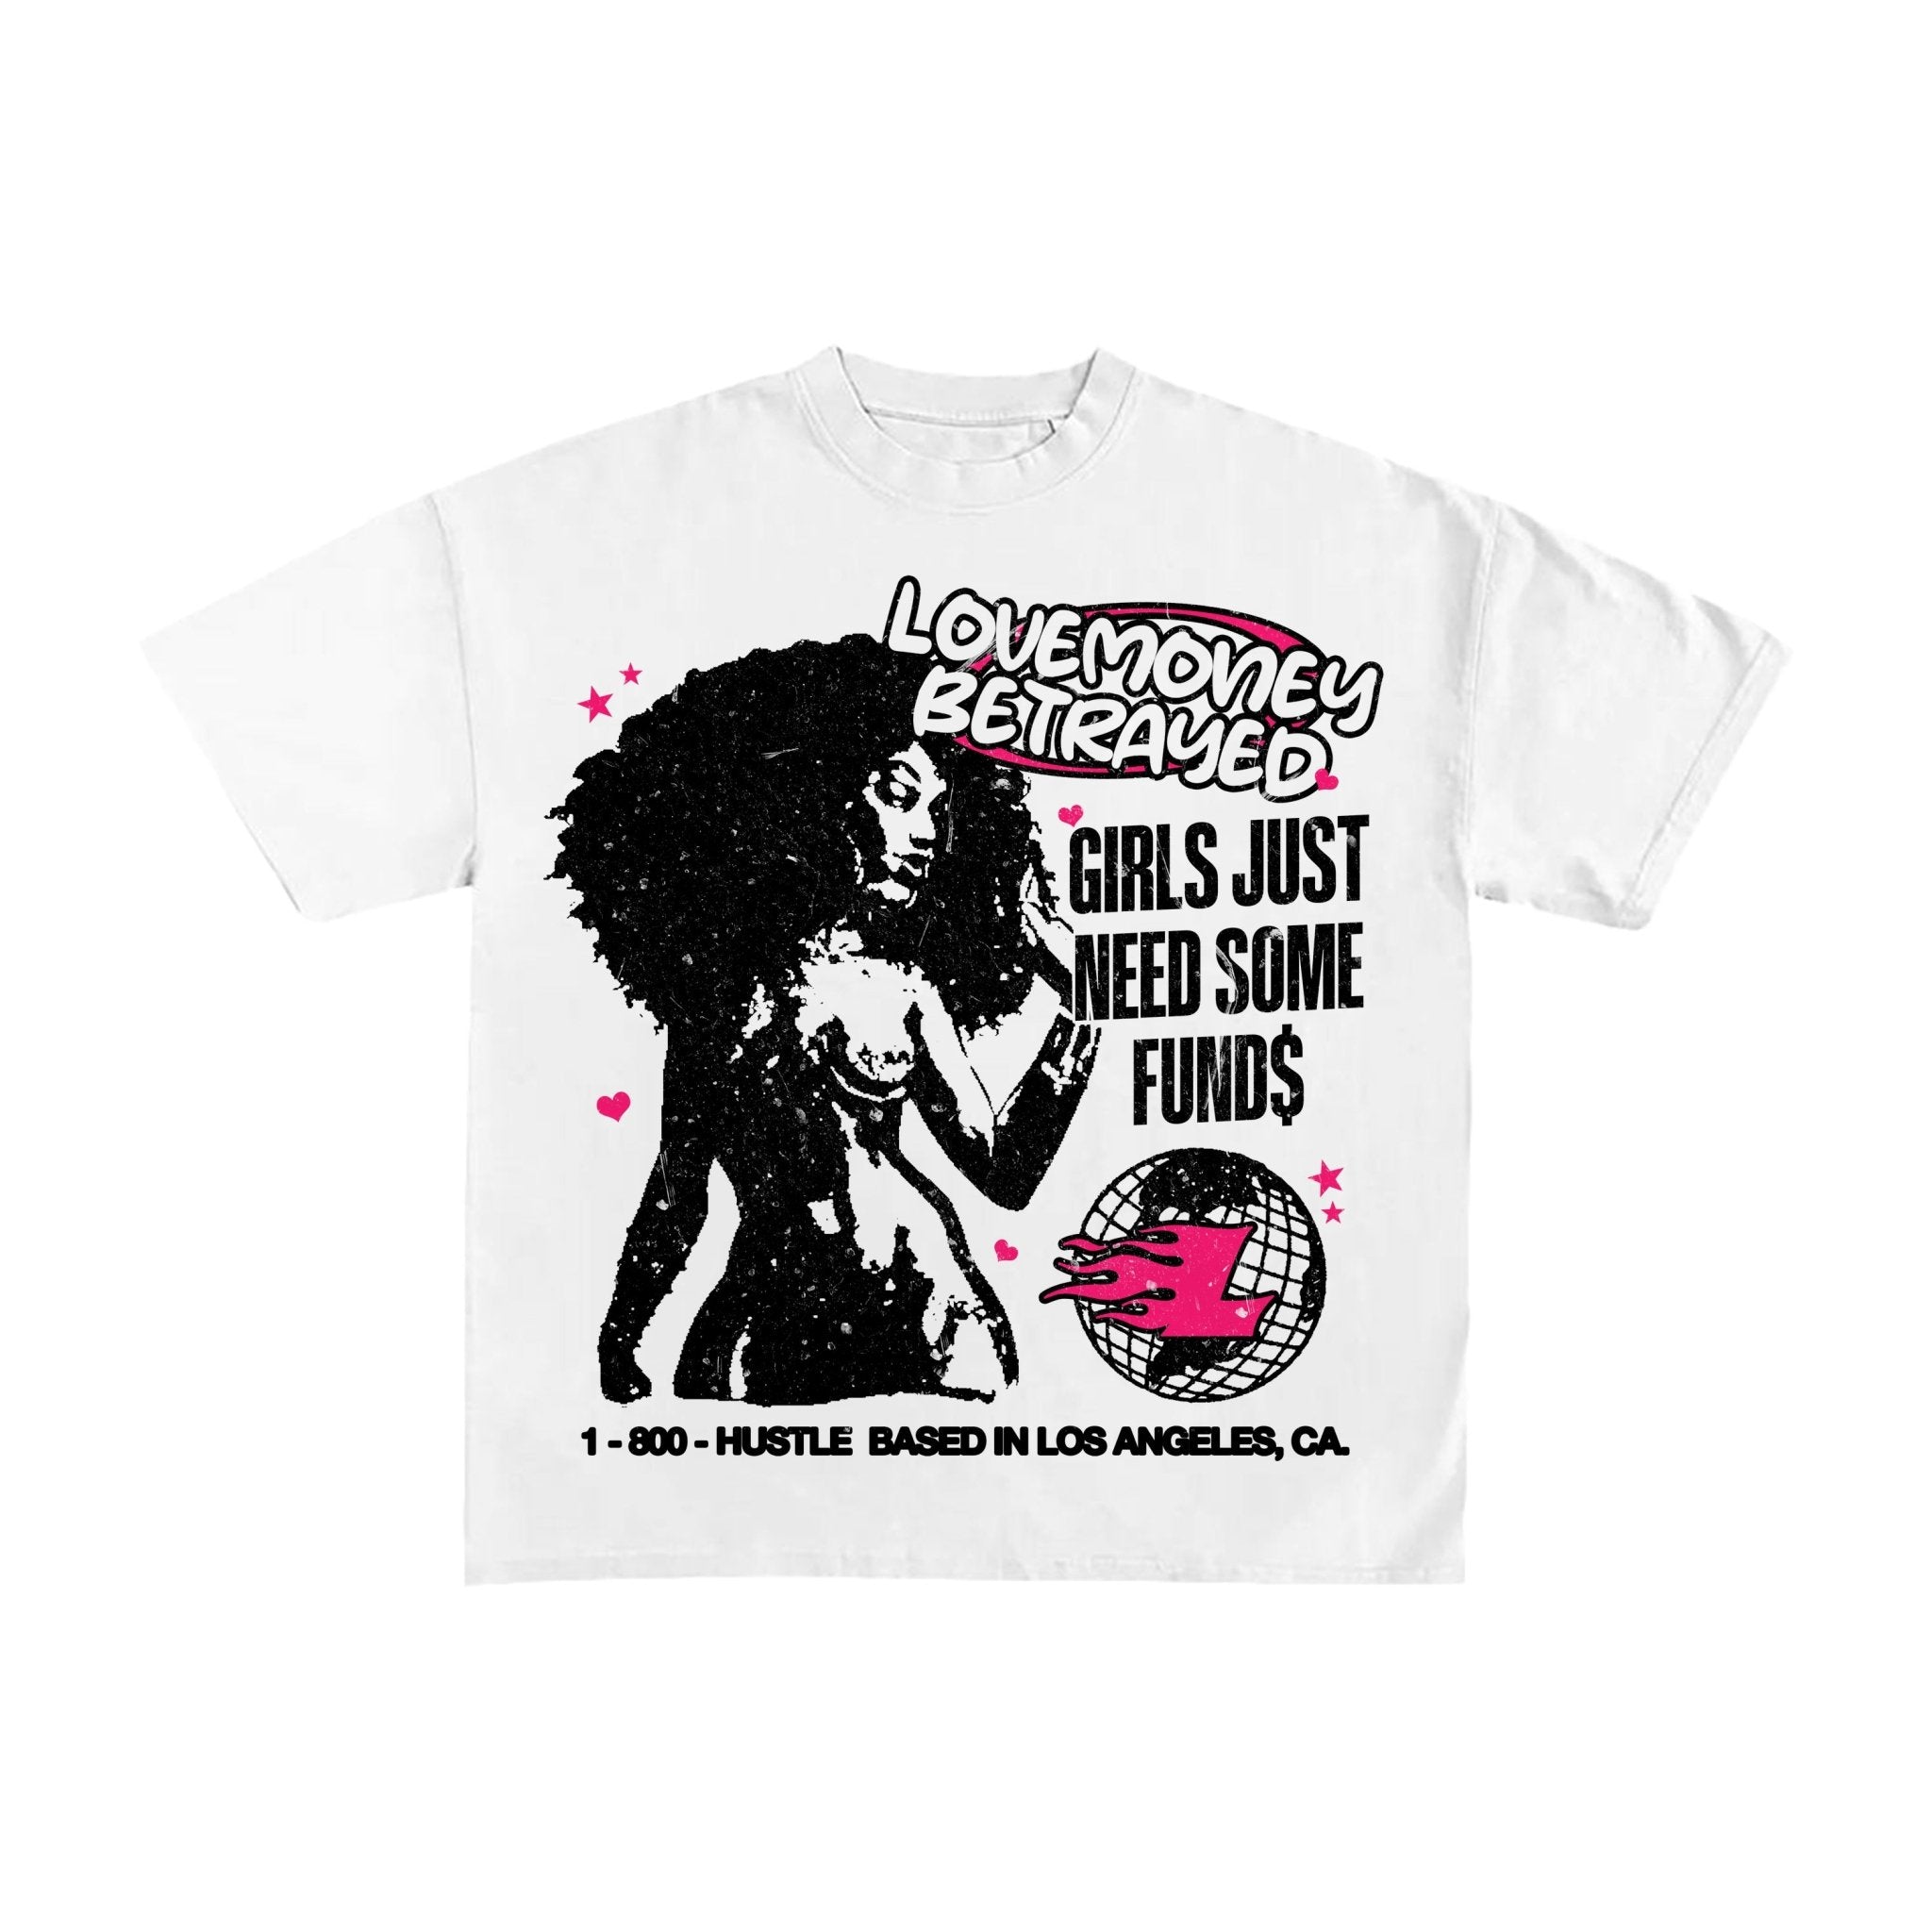 Girls Just Need Some Funds Tee - shopdumbcreez